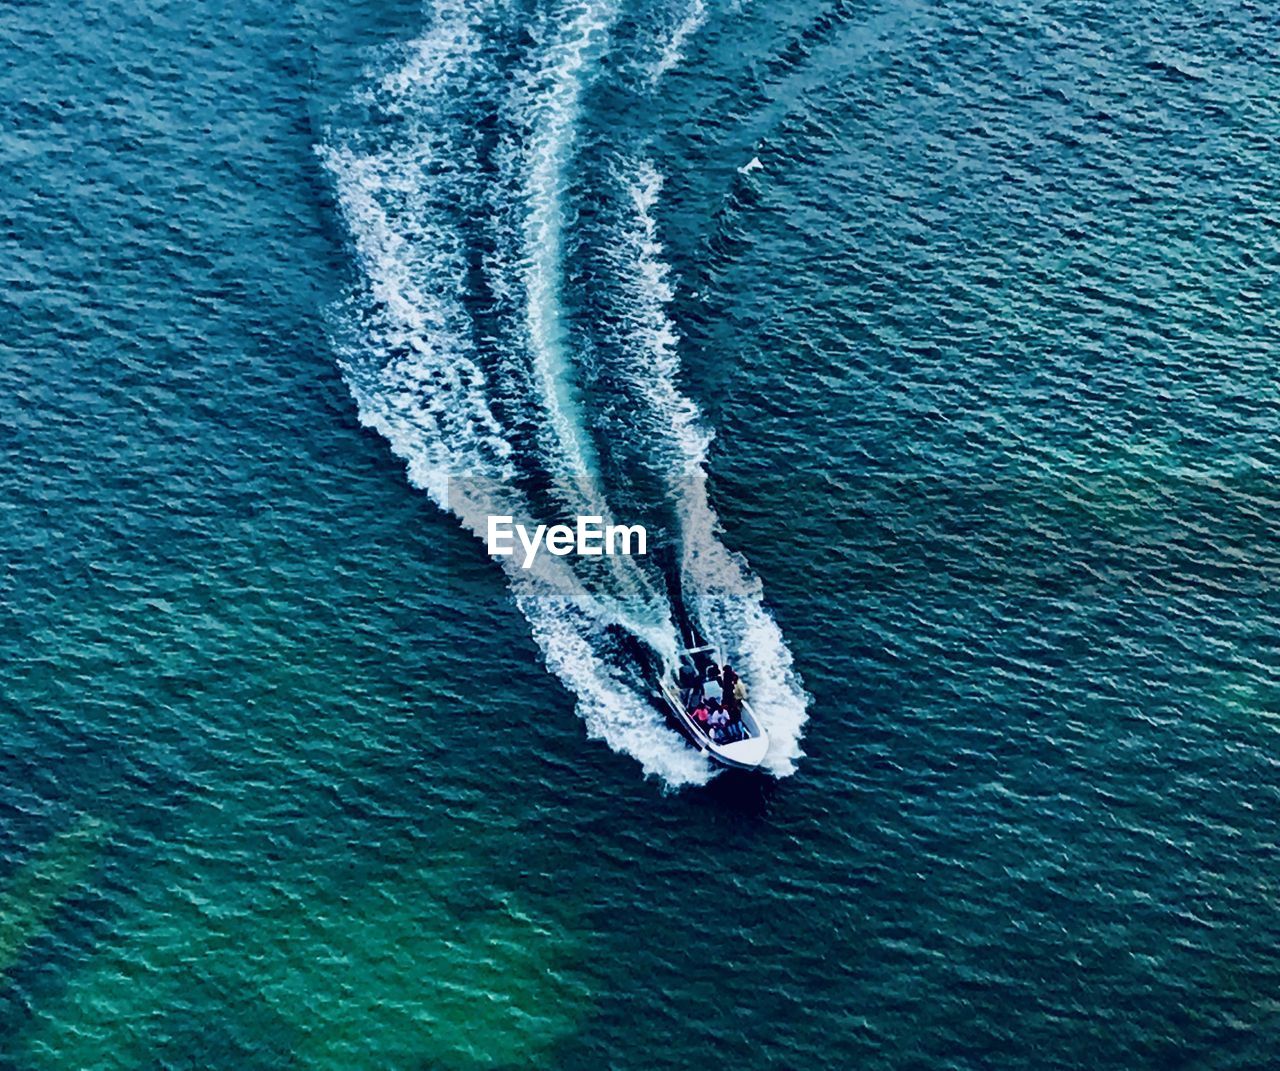 HIGH ANGLE VIEW OF BOAT IN SEA